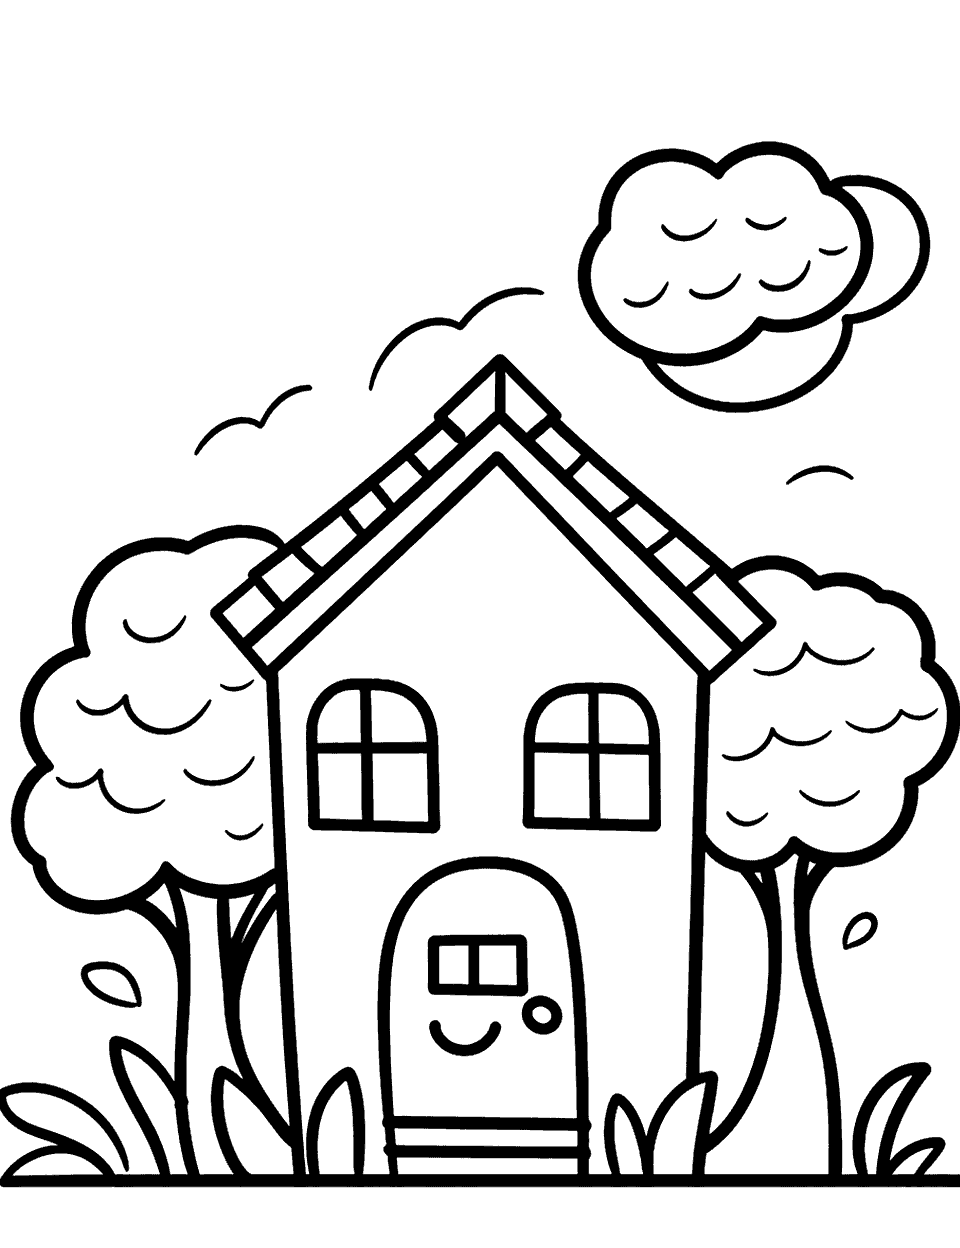 My First House Coloring Page - A simple house with trees next to it.